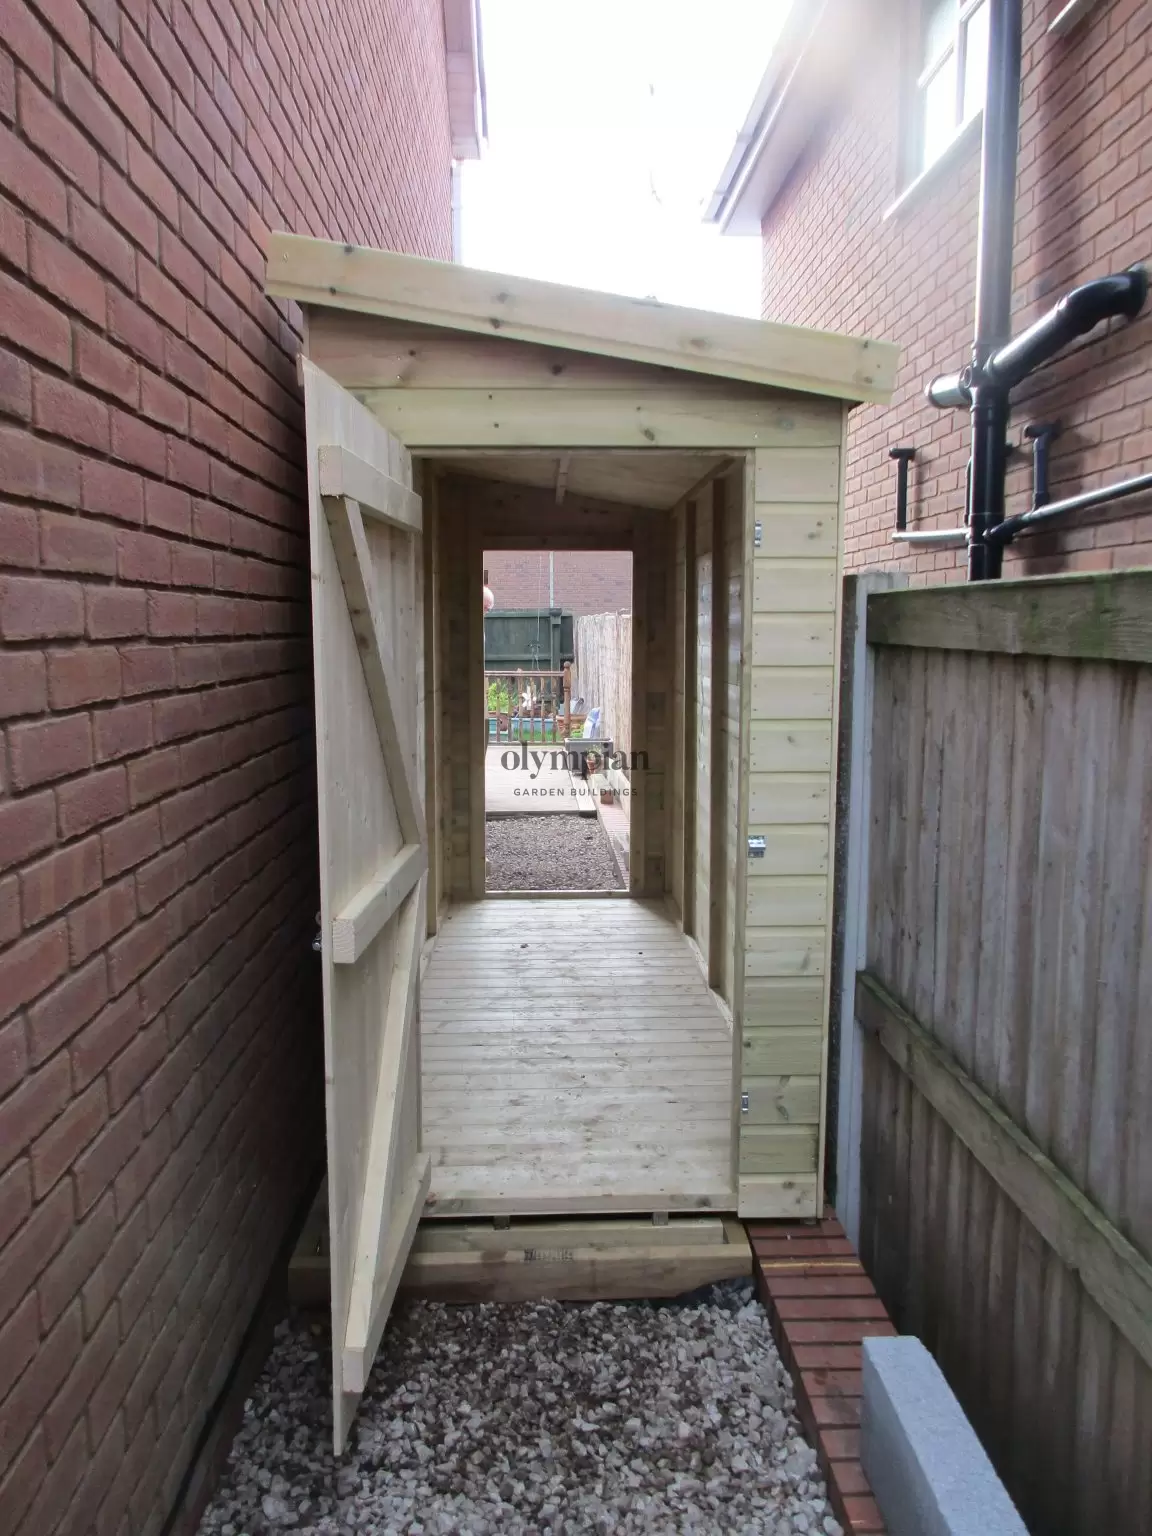 Alleyway Sheds